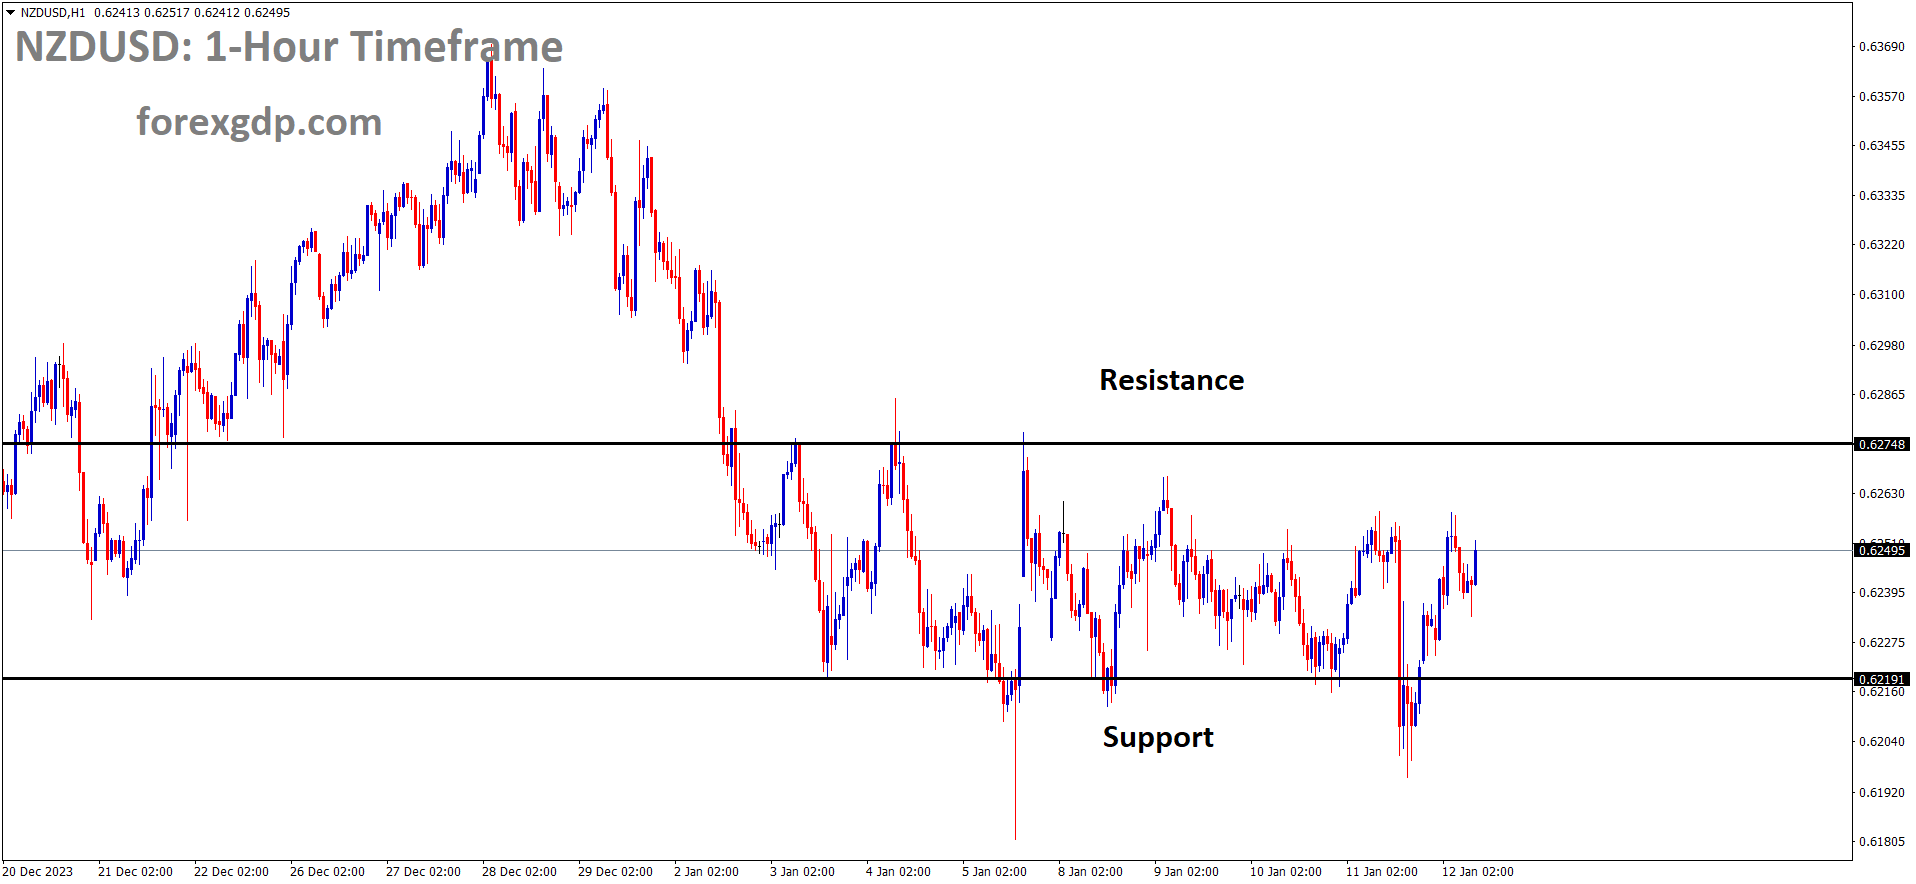 NZDUSD is moving in the Box pattern and the market has rebounded from the support area of the pattern